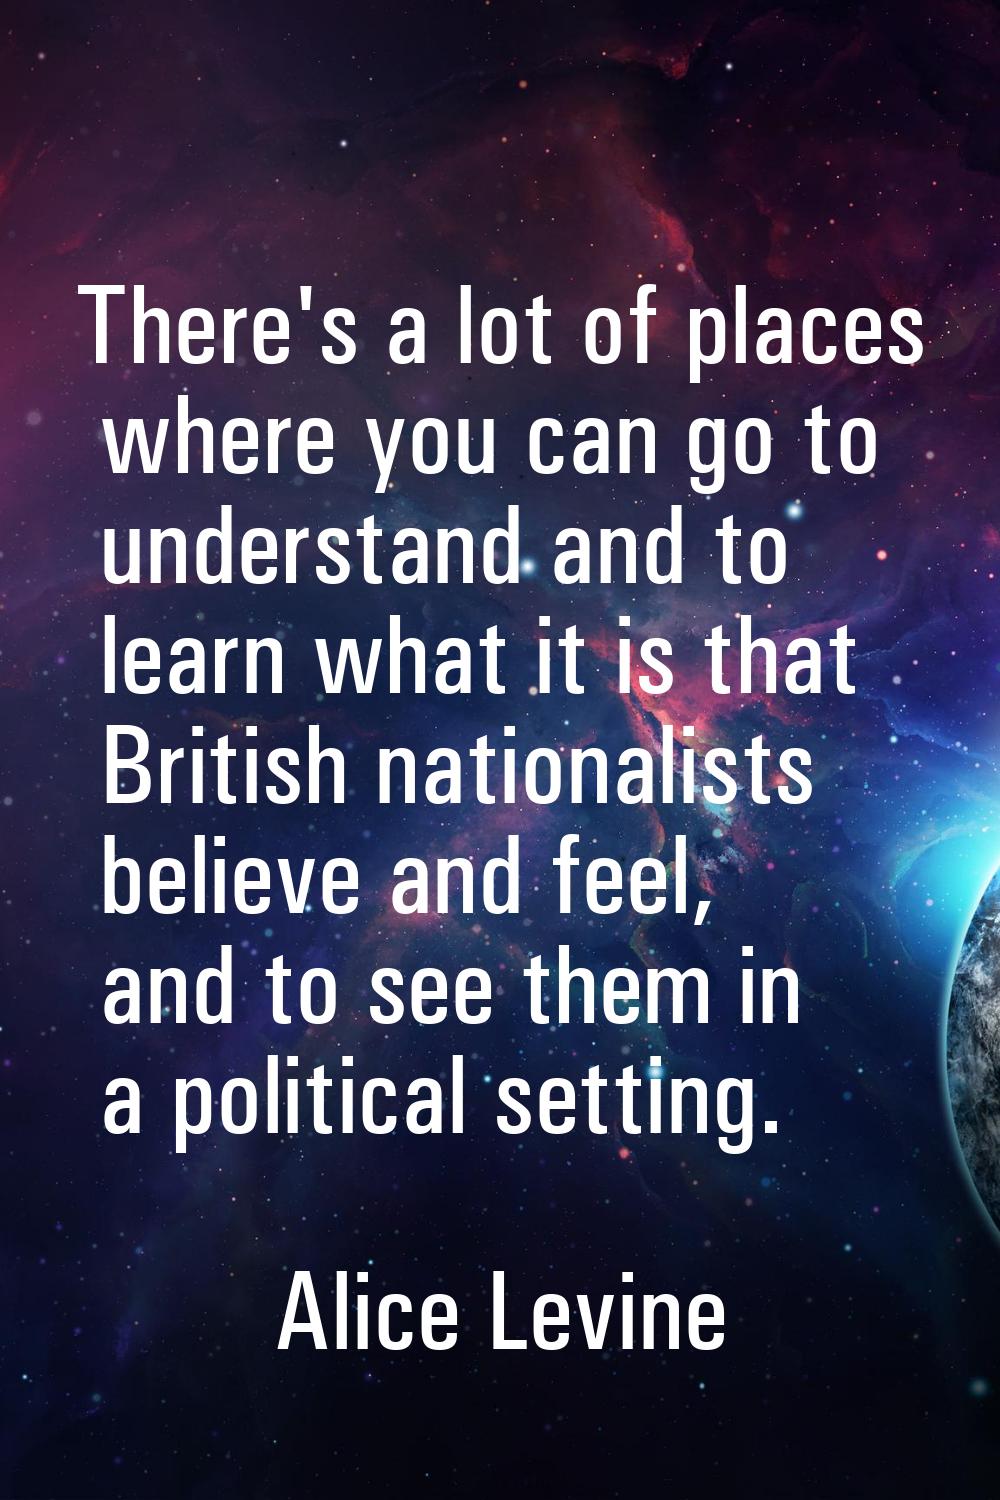 There's a lot of places where you can go to understand and to learn what it is that British nationa